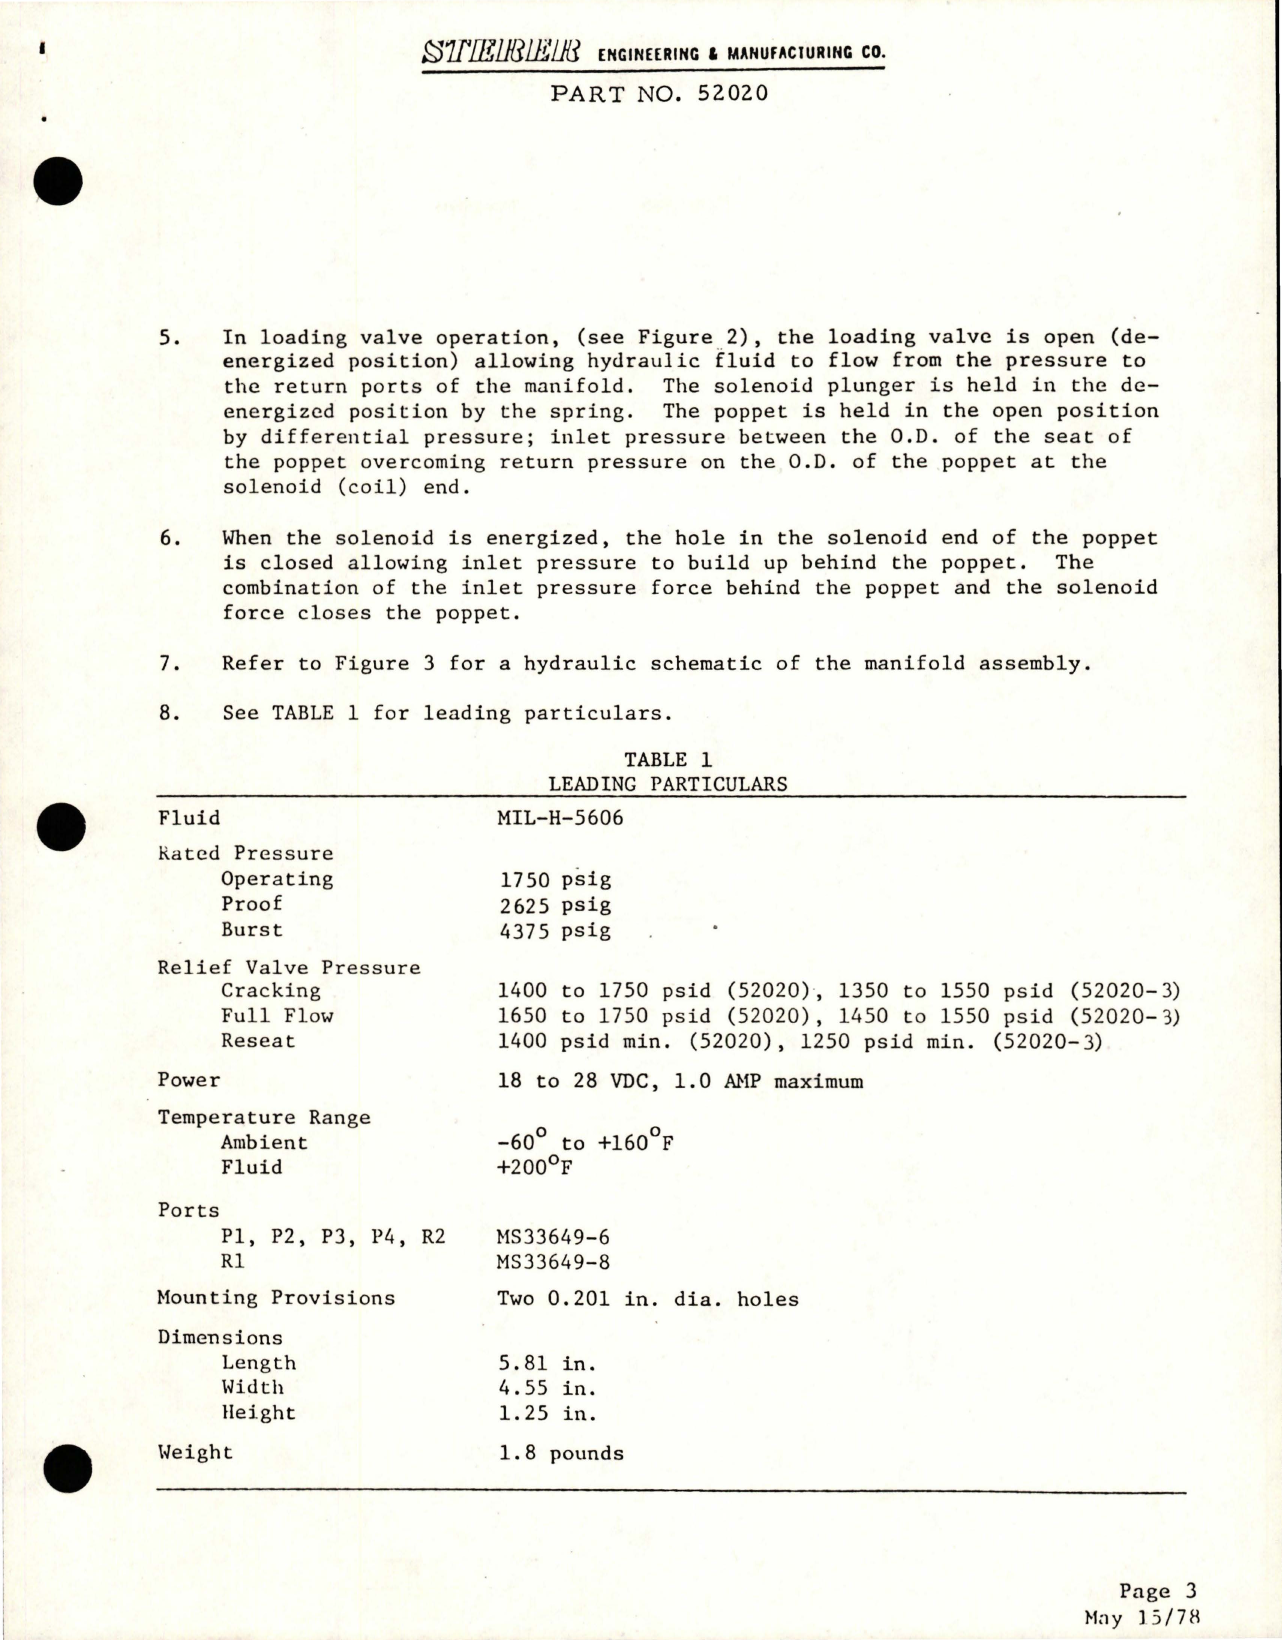 Sample page 9 from AirCorps Library document: Overhaul Manual with Illustrated Parts List for Hydraulic Manifold Assembly - Part 52020, 52020-3